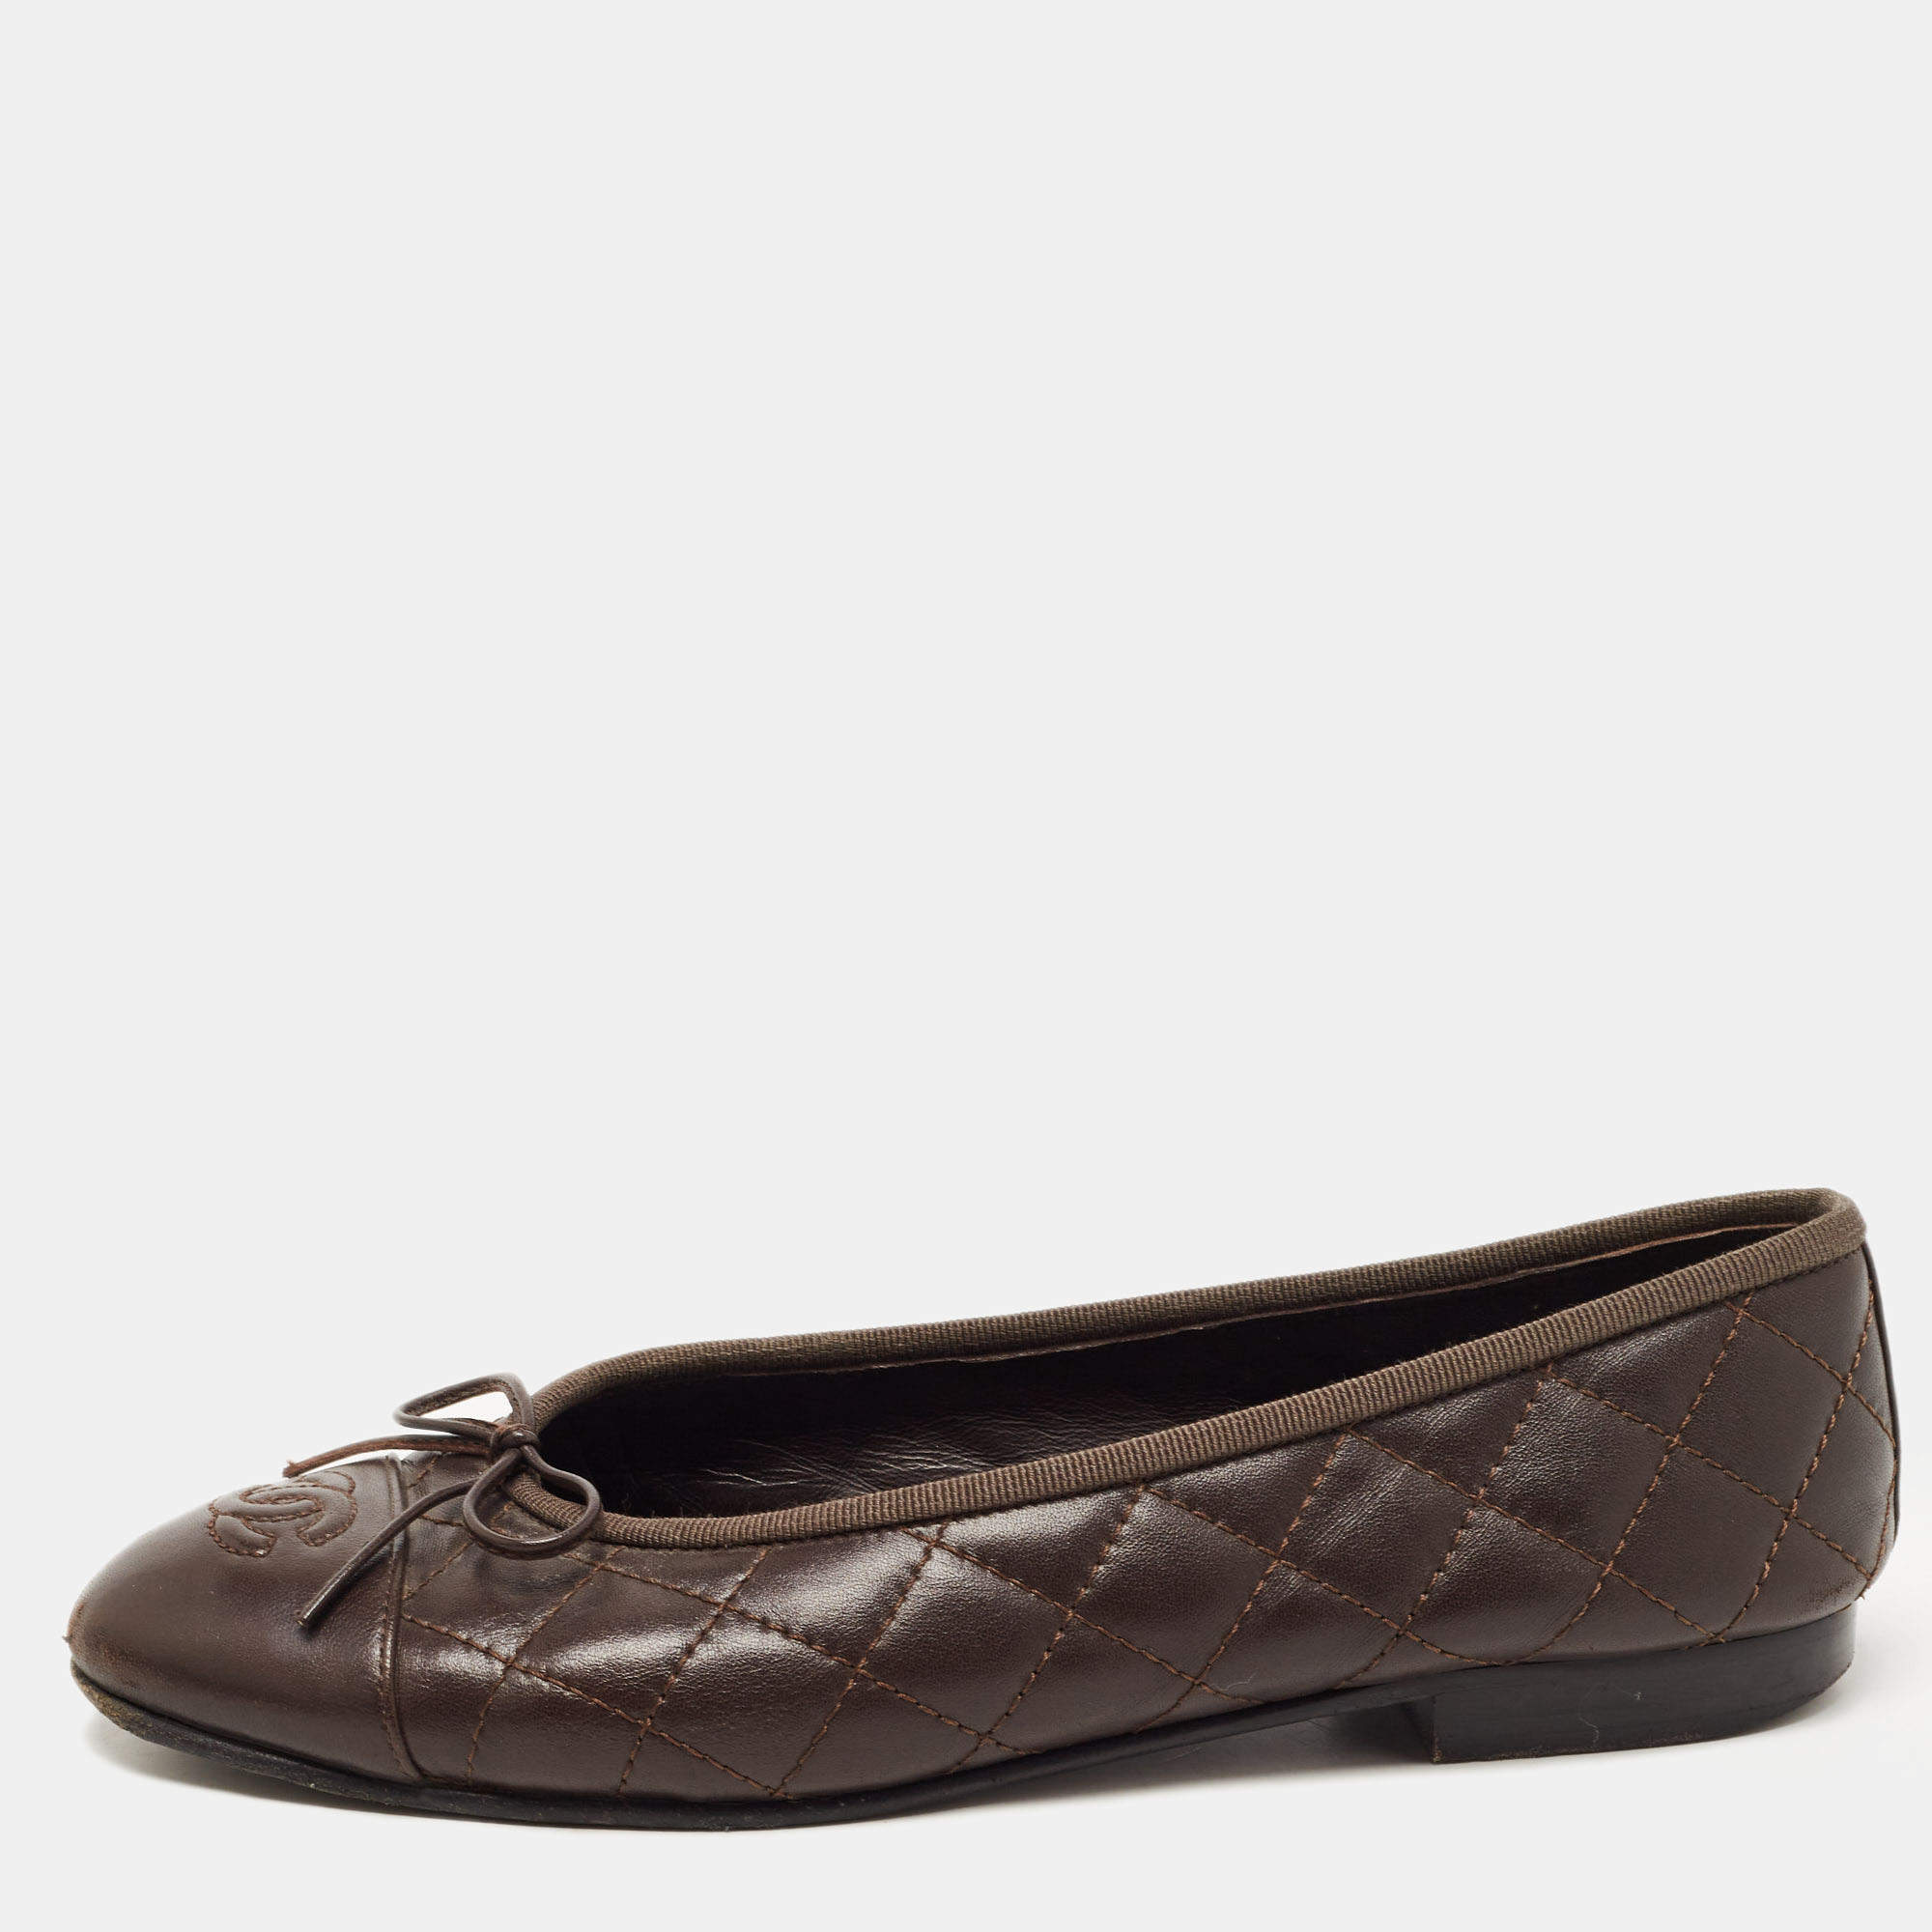 Chanel Dark Brown Quilted Leather Chanel Flats | 37.5 CC TLC Ballet Bow Size